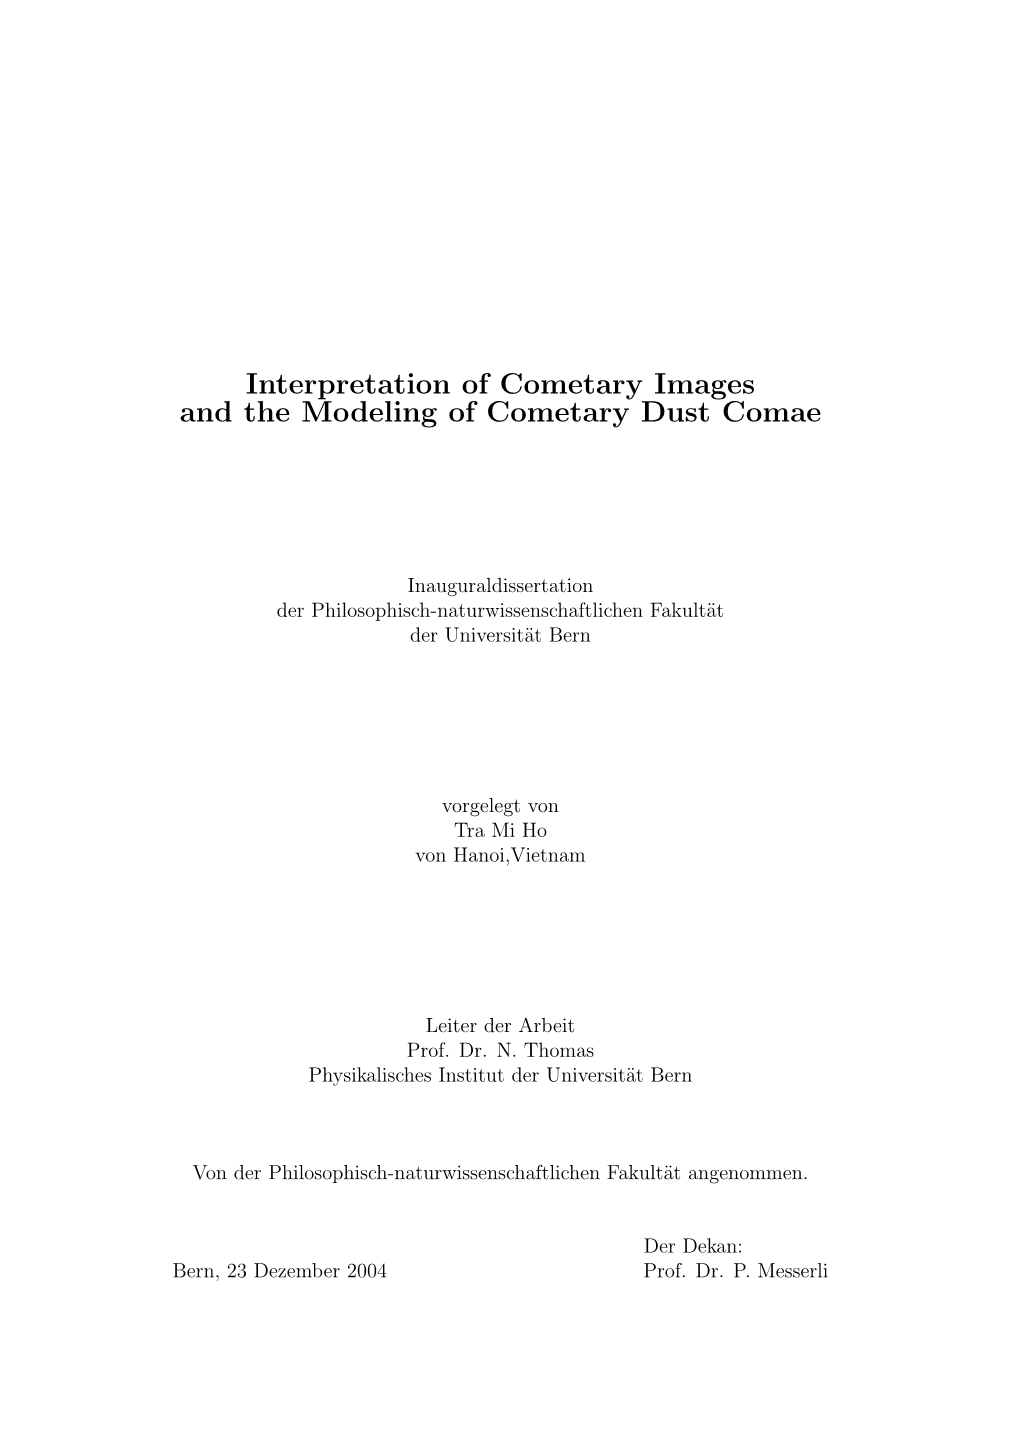 Interpretation of Cometary Images and the Modeling of Cometary Dust Comae